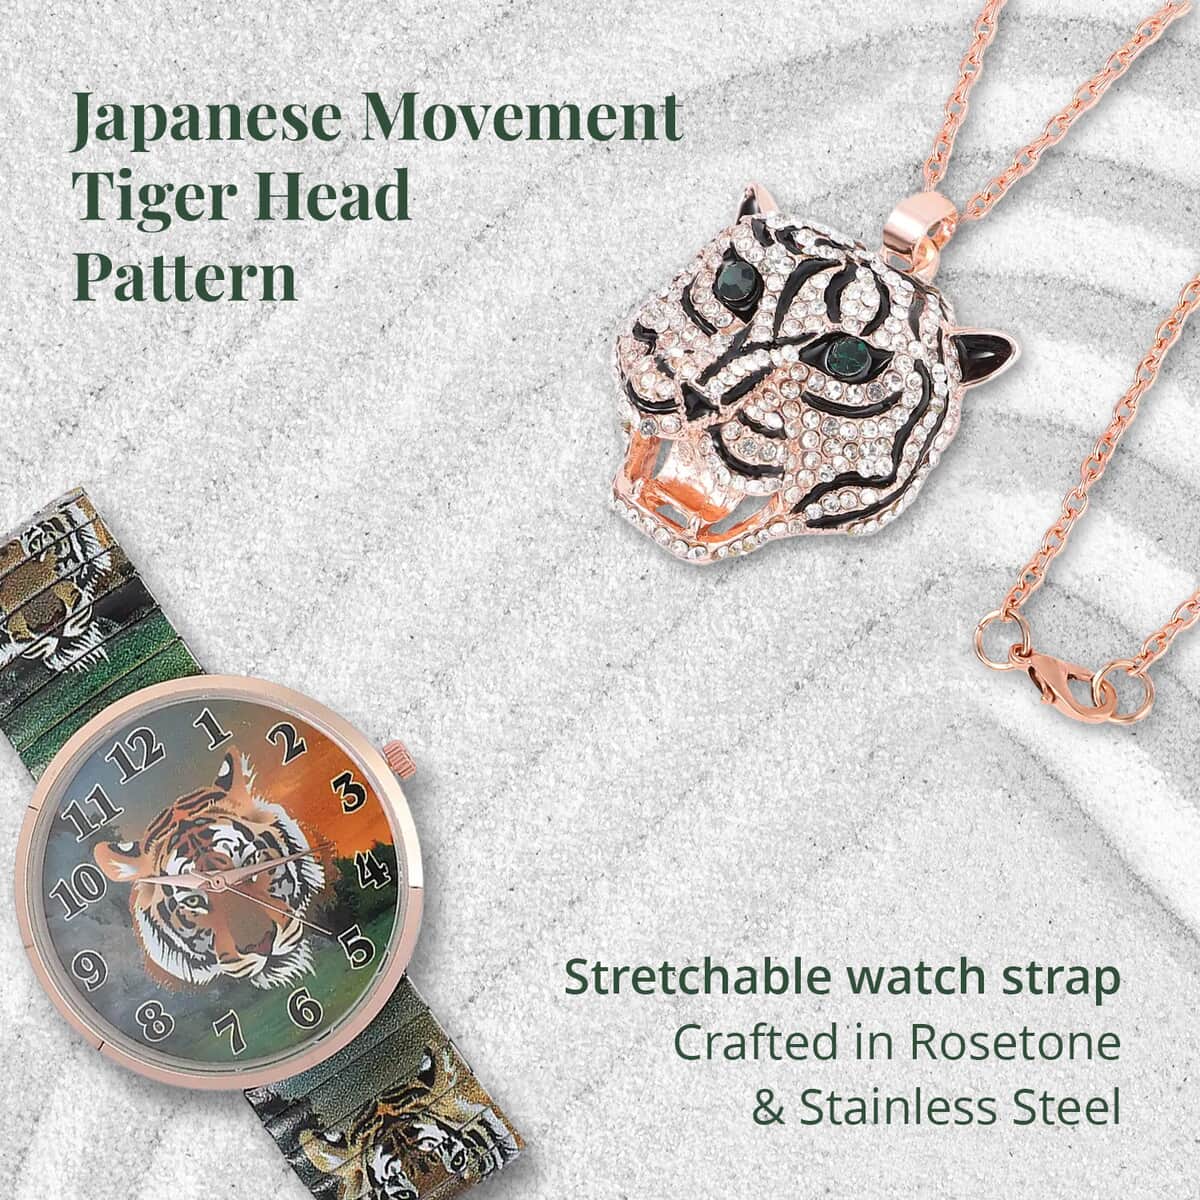 Strada Green & White Austrian Crystal, Enameled Japanese Movement Tiger Head Pattern Stretch Watch and Tiger Head Pendant Necklace 24In in Rosetone image number 3